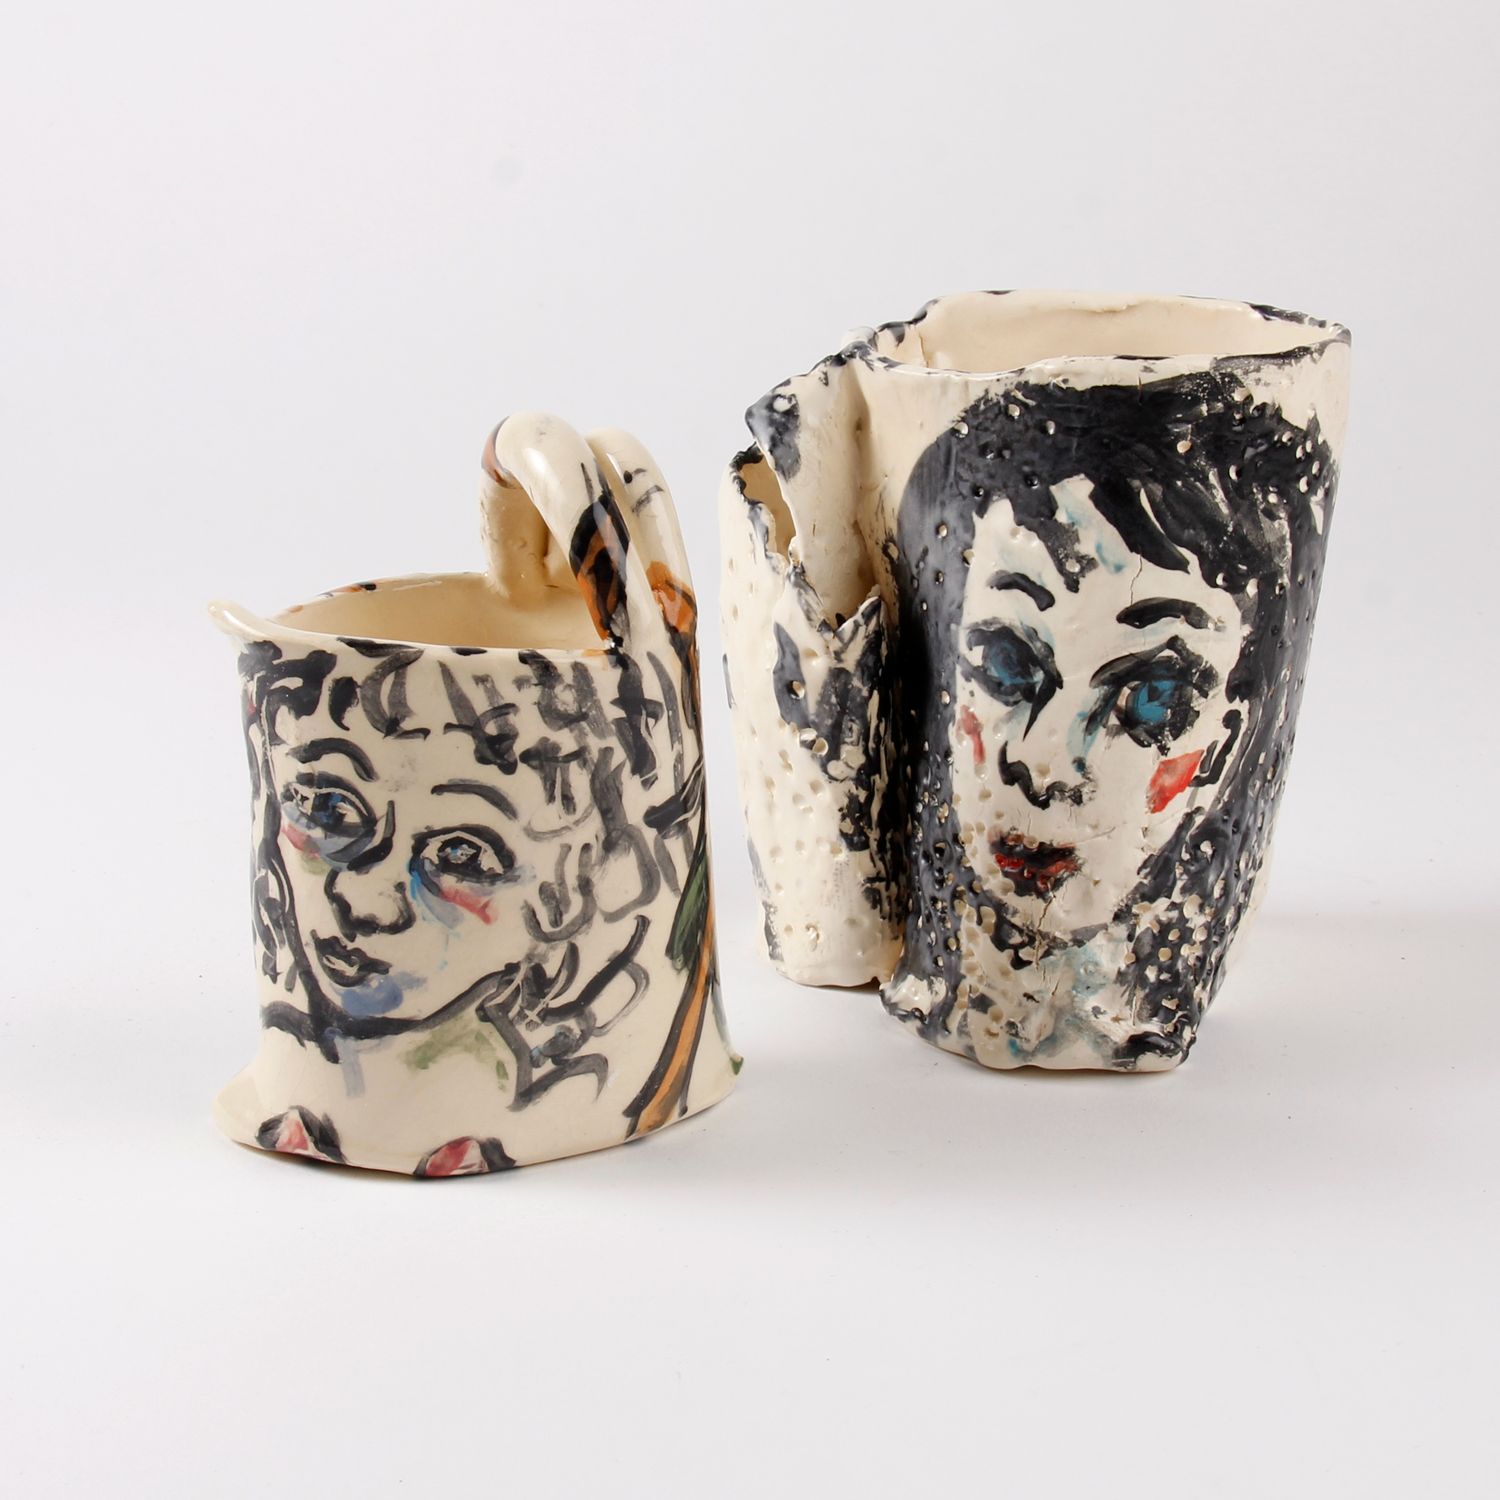 Patricia Lazar: Curly Handle Mug with Lady Product Image 2 of 3